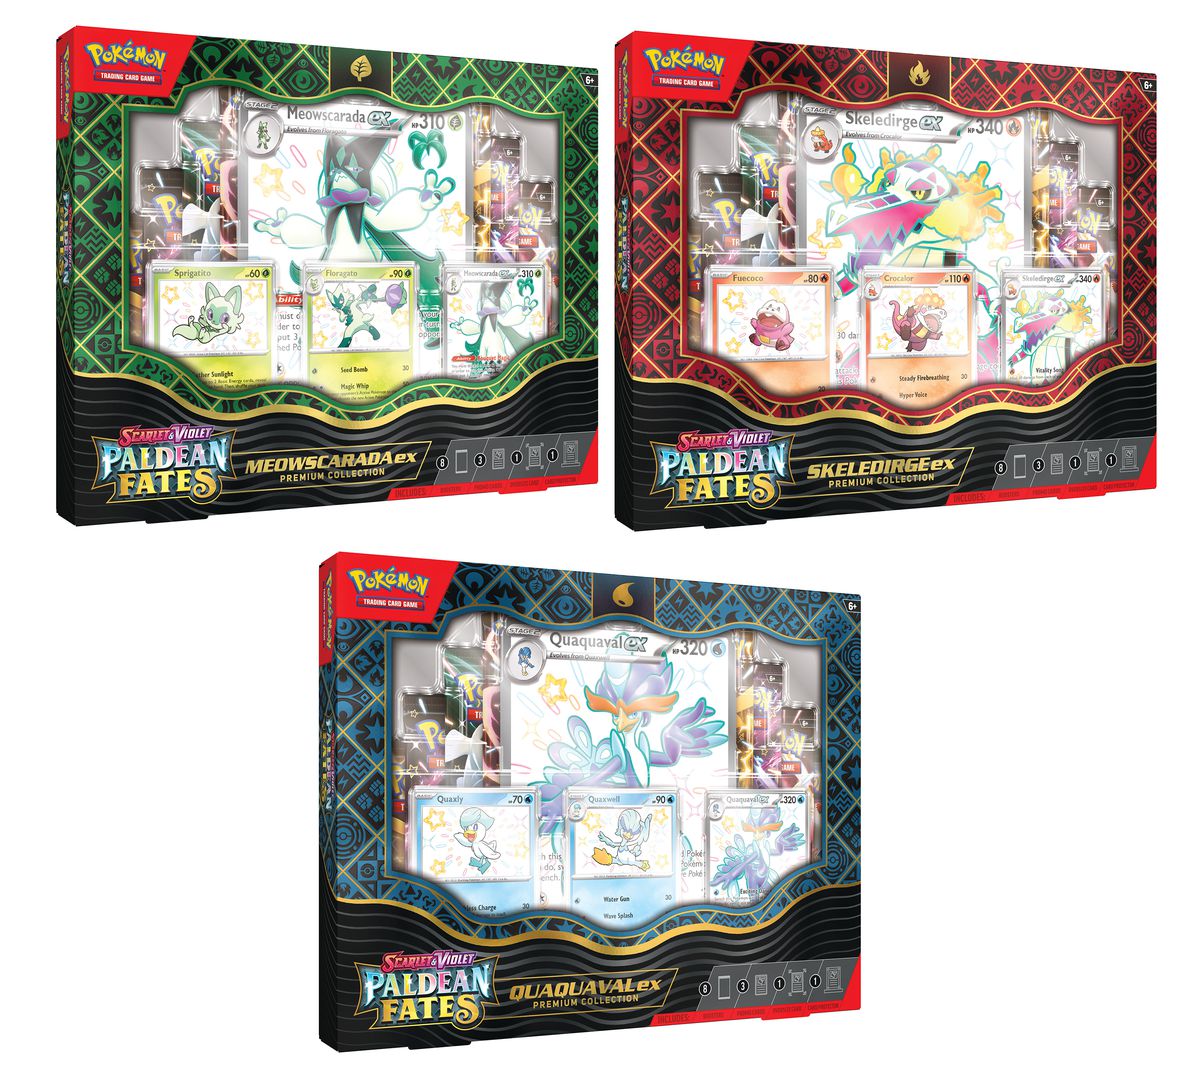 Pokémon TCG Scarlet and Violet — Paldean Fates premium collection boxes with special foil versions of the Paldean starters in them.